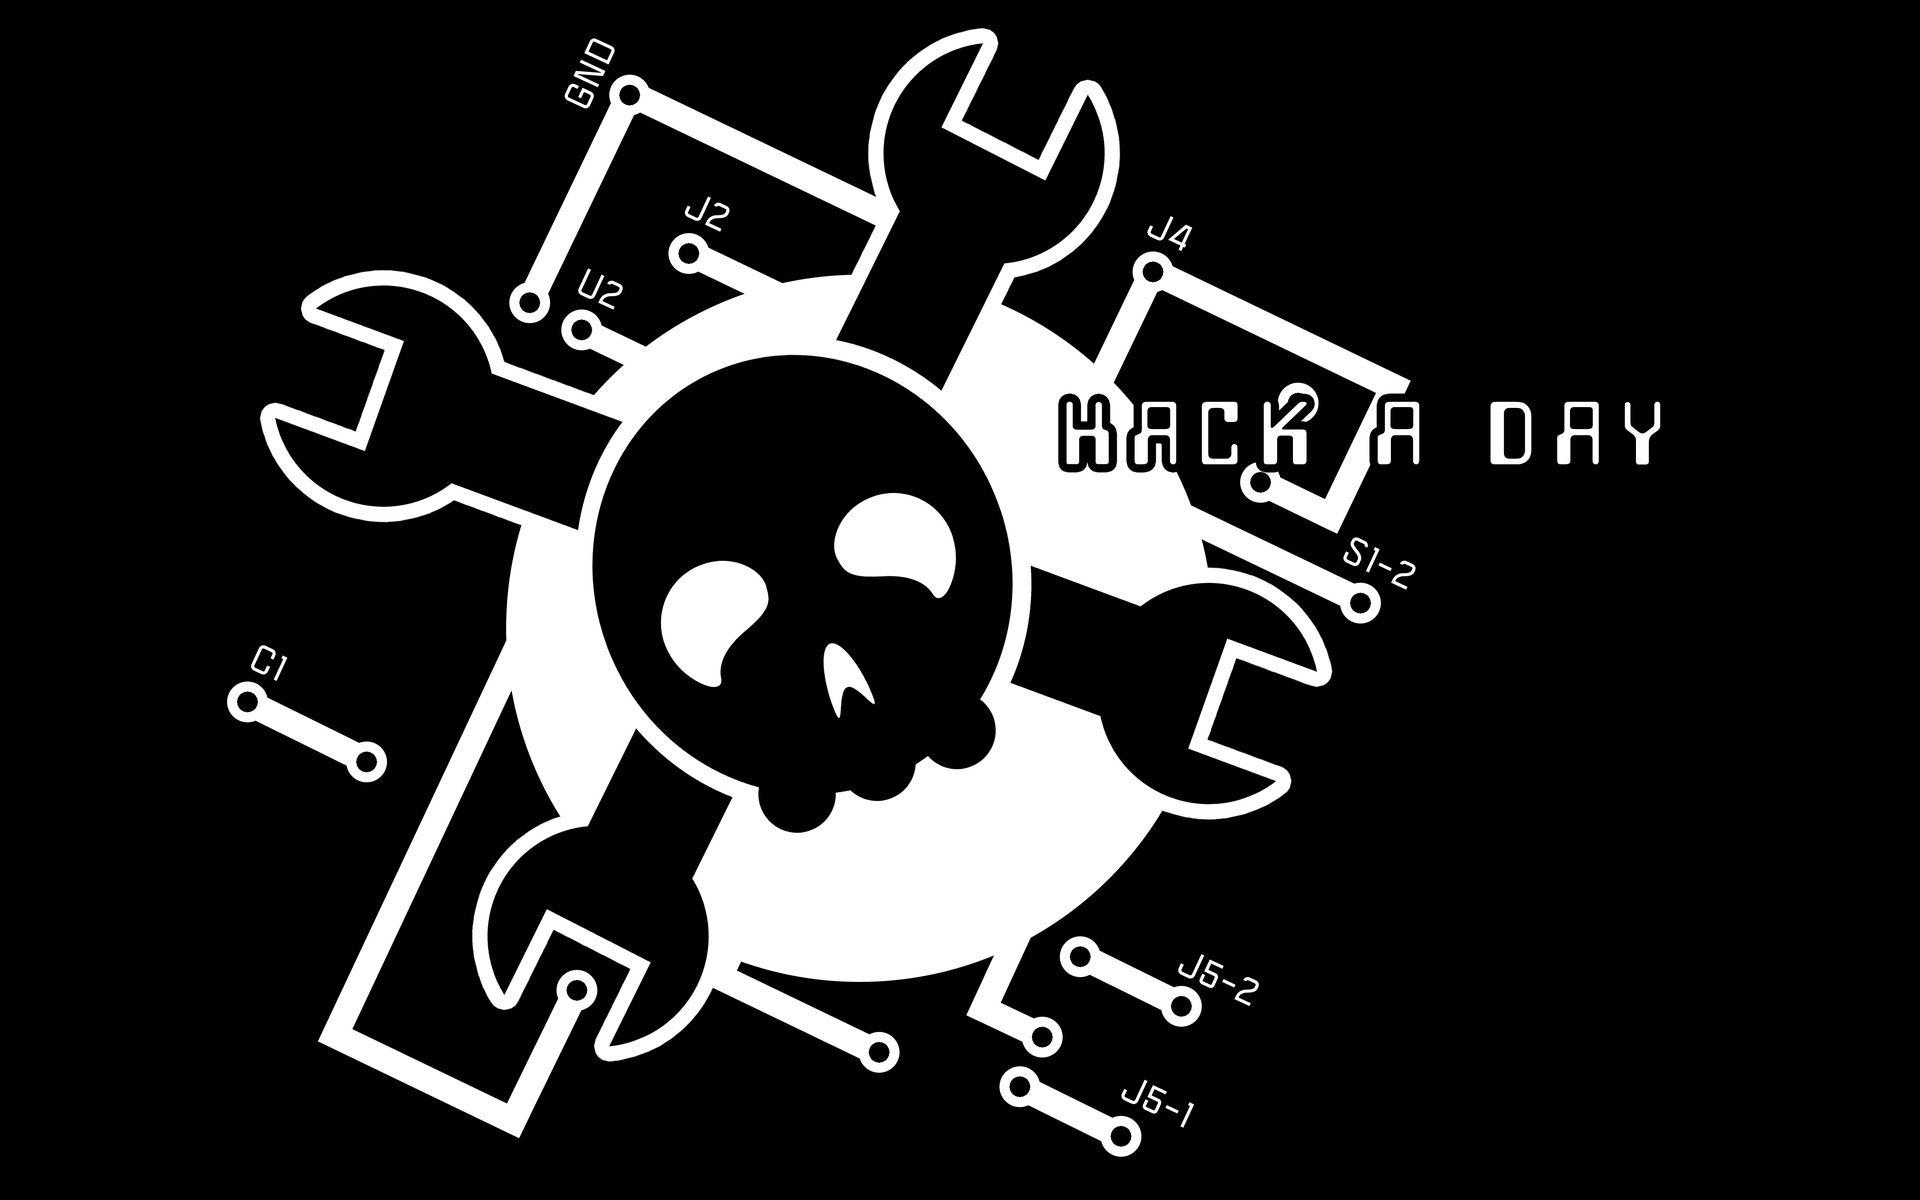 Download the Hack A Day Wallpaper, Hack A Day iPhone Wallpaper, Hack